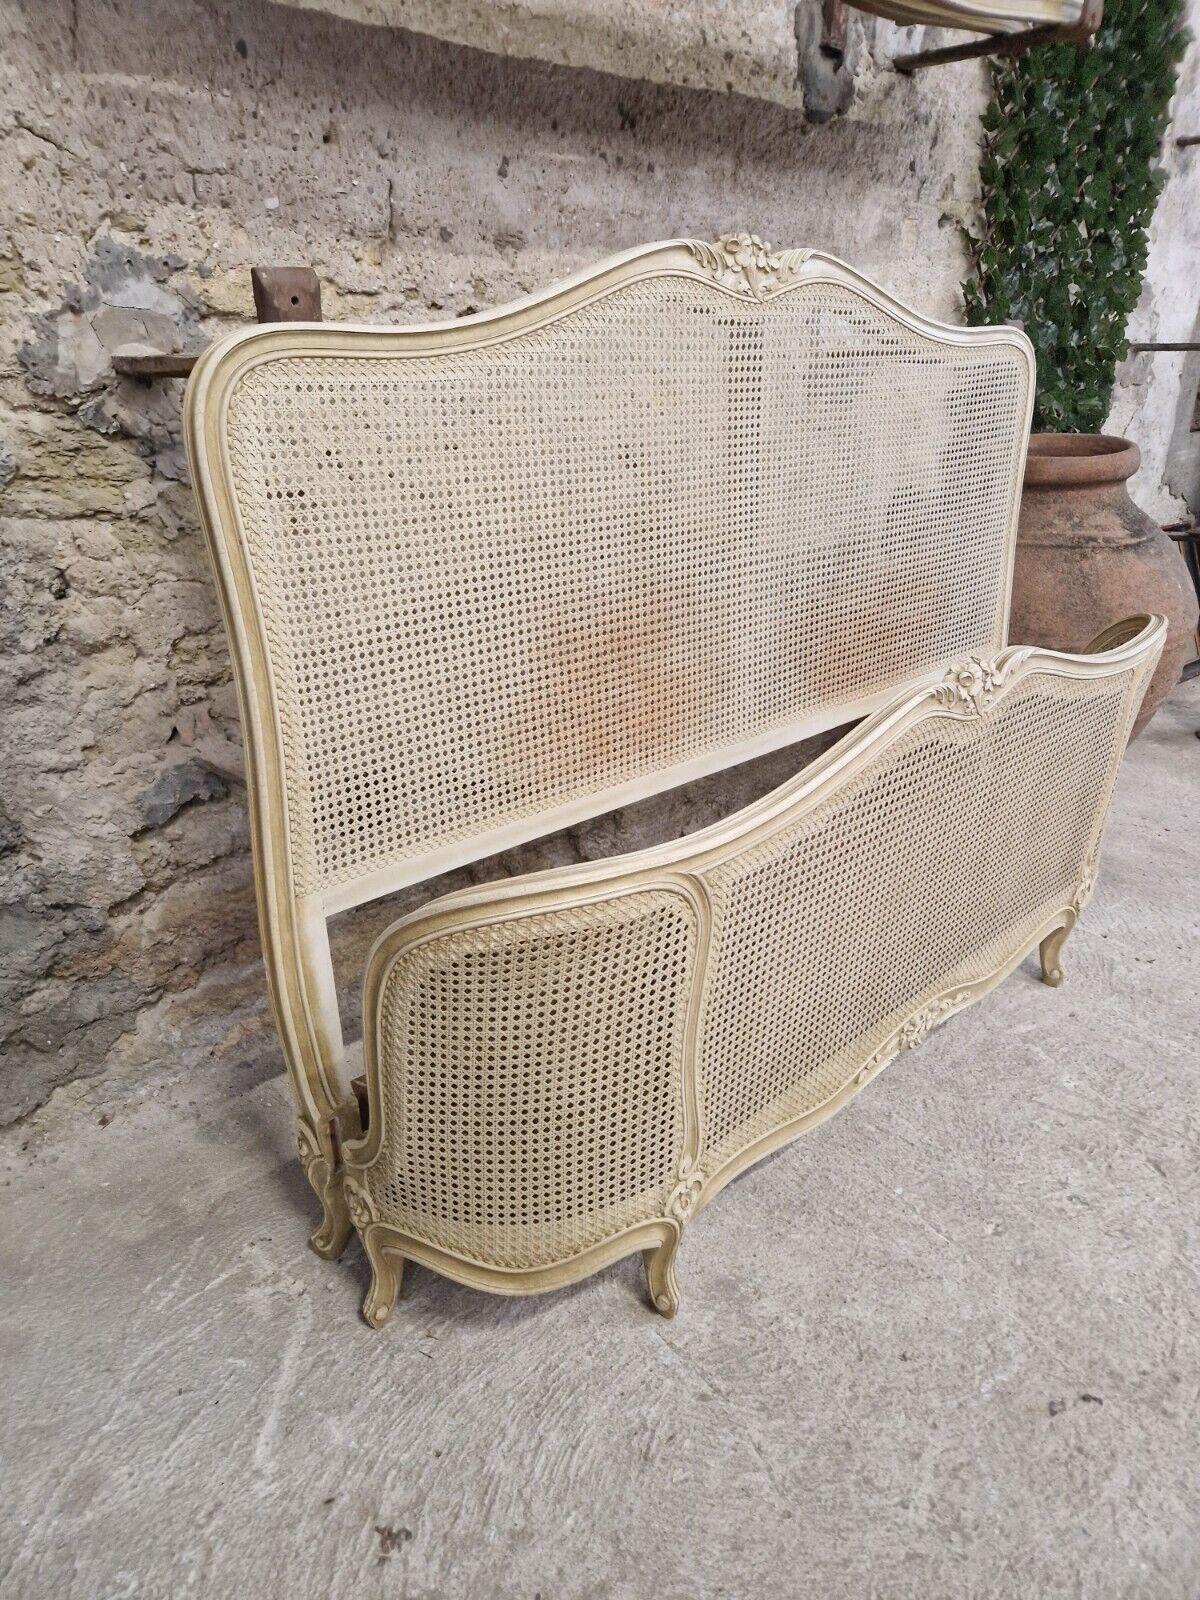 Lacquered Antique Cane French Bed Corbeille Cream Lacquer Louis XV Style